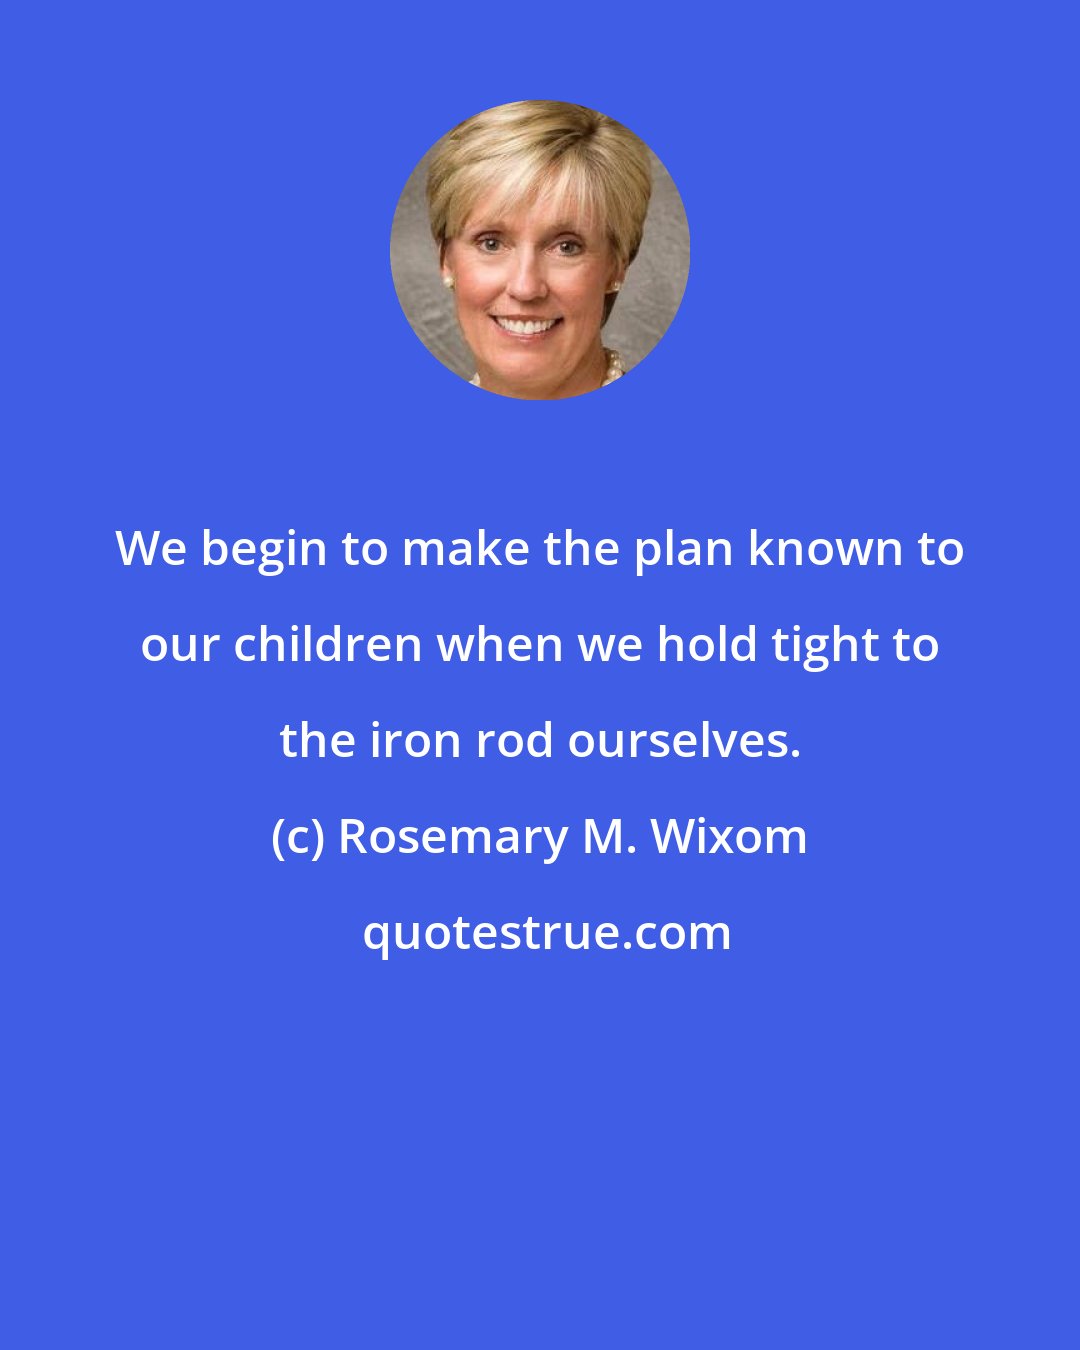 Rosemary M. Wixom: We begin to make the plan known to our children when we hold tight to the iron rod ourselves.